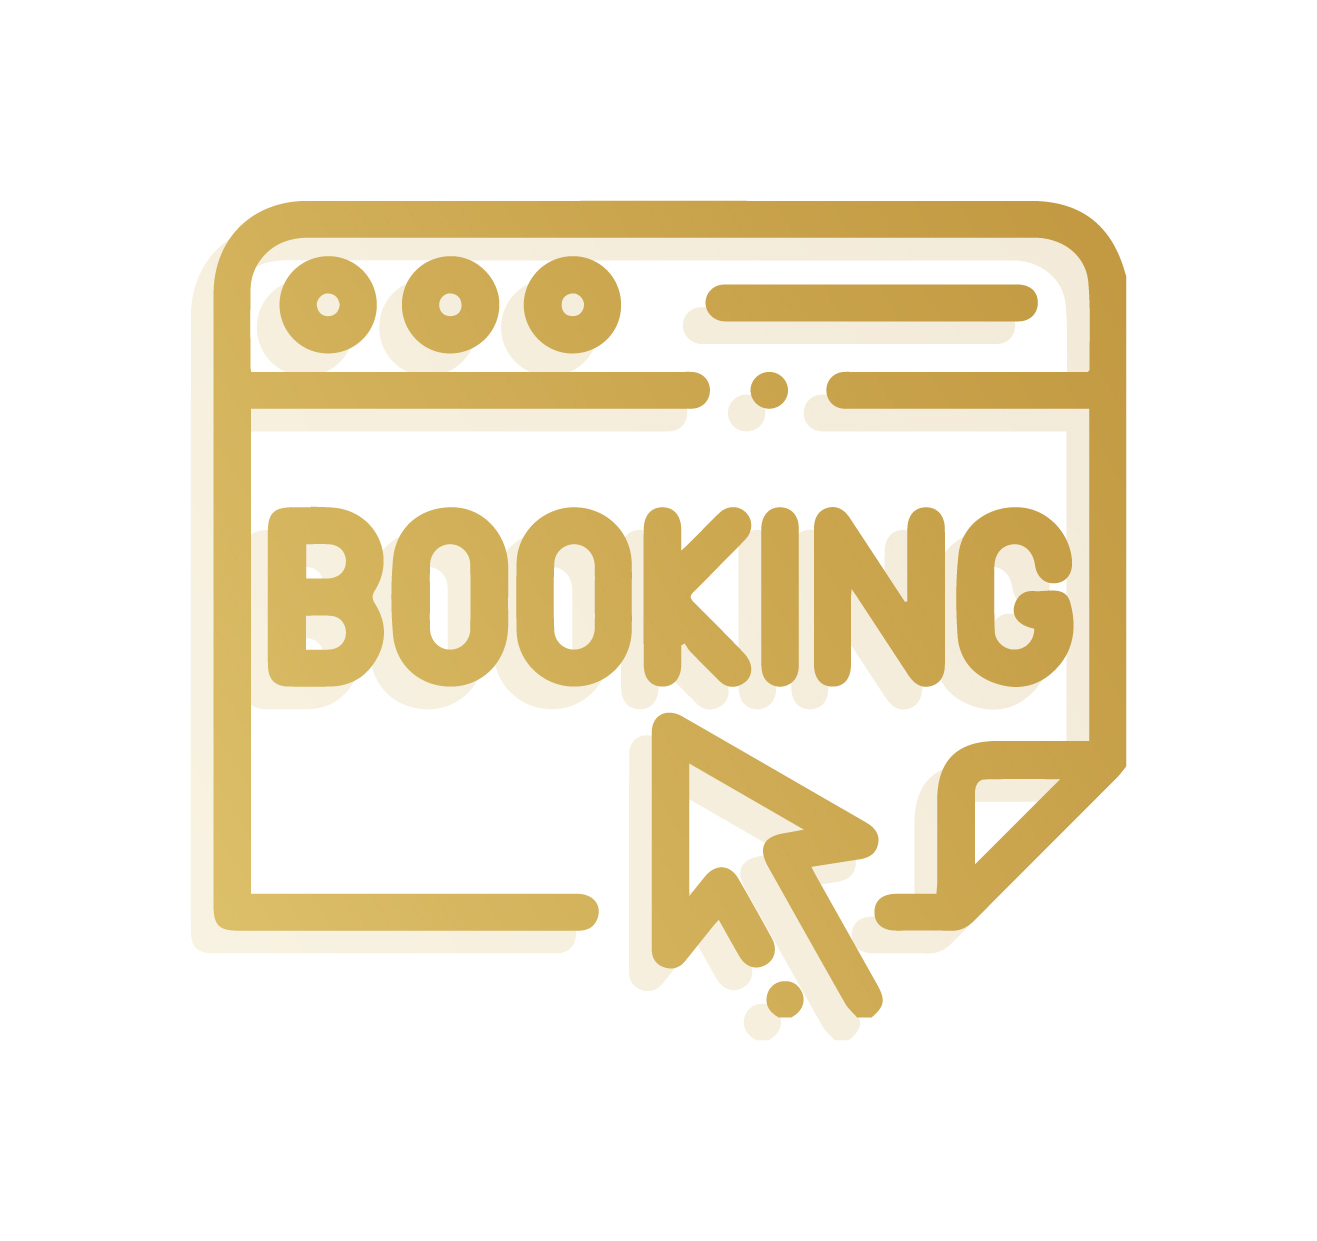 Easy & Quick Booking